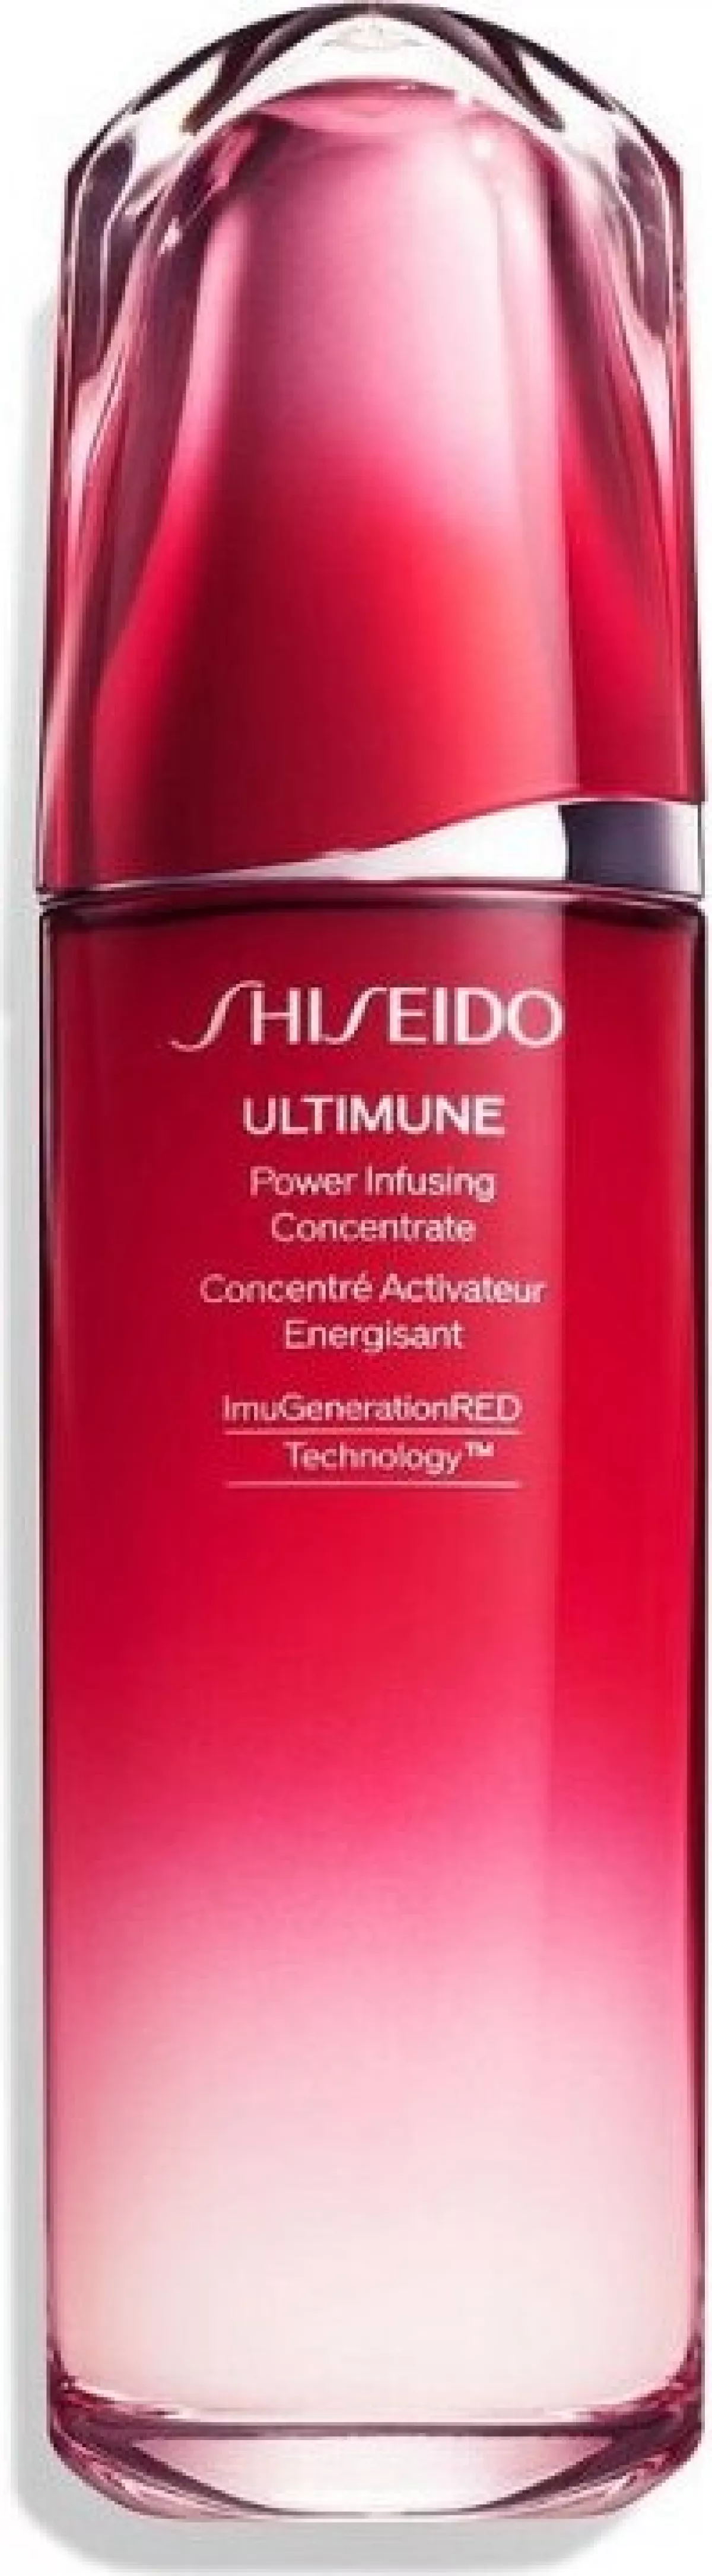 #1 - Shiseido - Ultimune Power Infusing Concentrate Serum 120 Ml